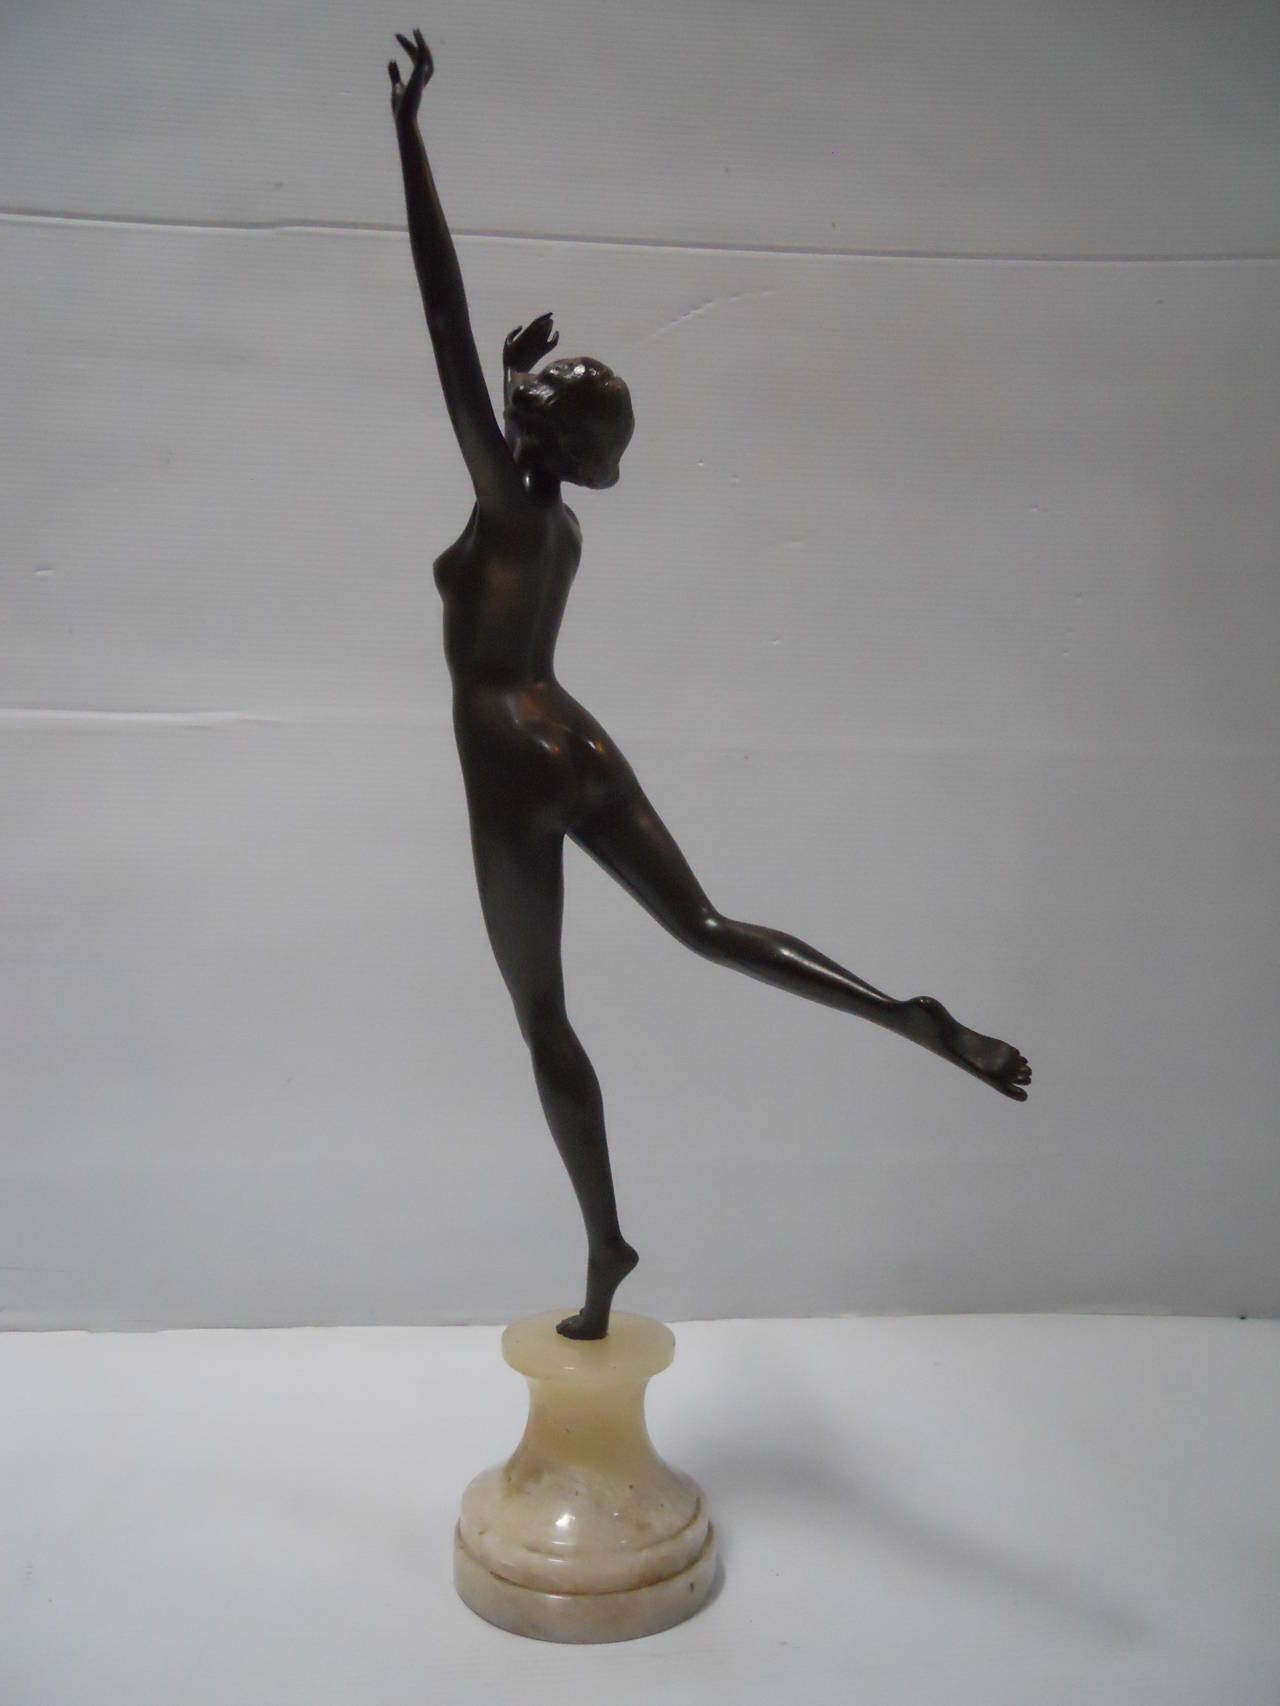 Fabulous Josef Lorenzl female statue.

This engaging bronze statue from the 1920s by Josef Lorenzl (1892-1950) depicts a fabulous dancing woman posed. The figure is artfully captured with one leg in the air and mounted on a cylindrical onyx